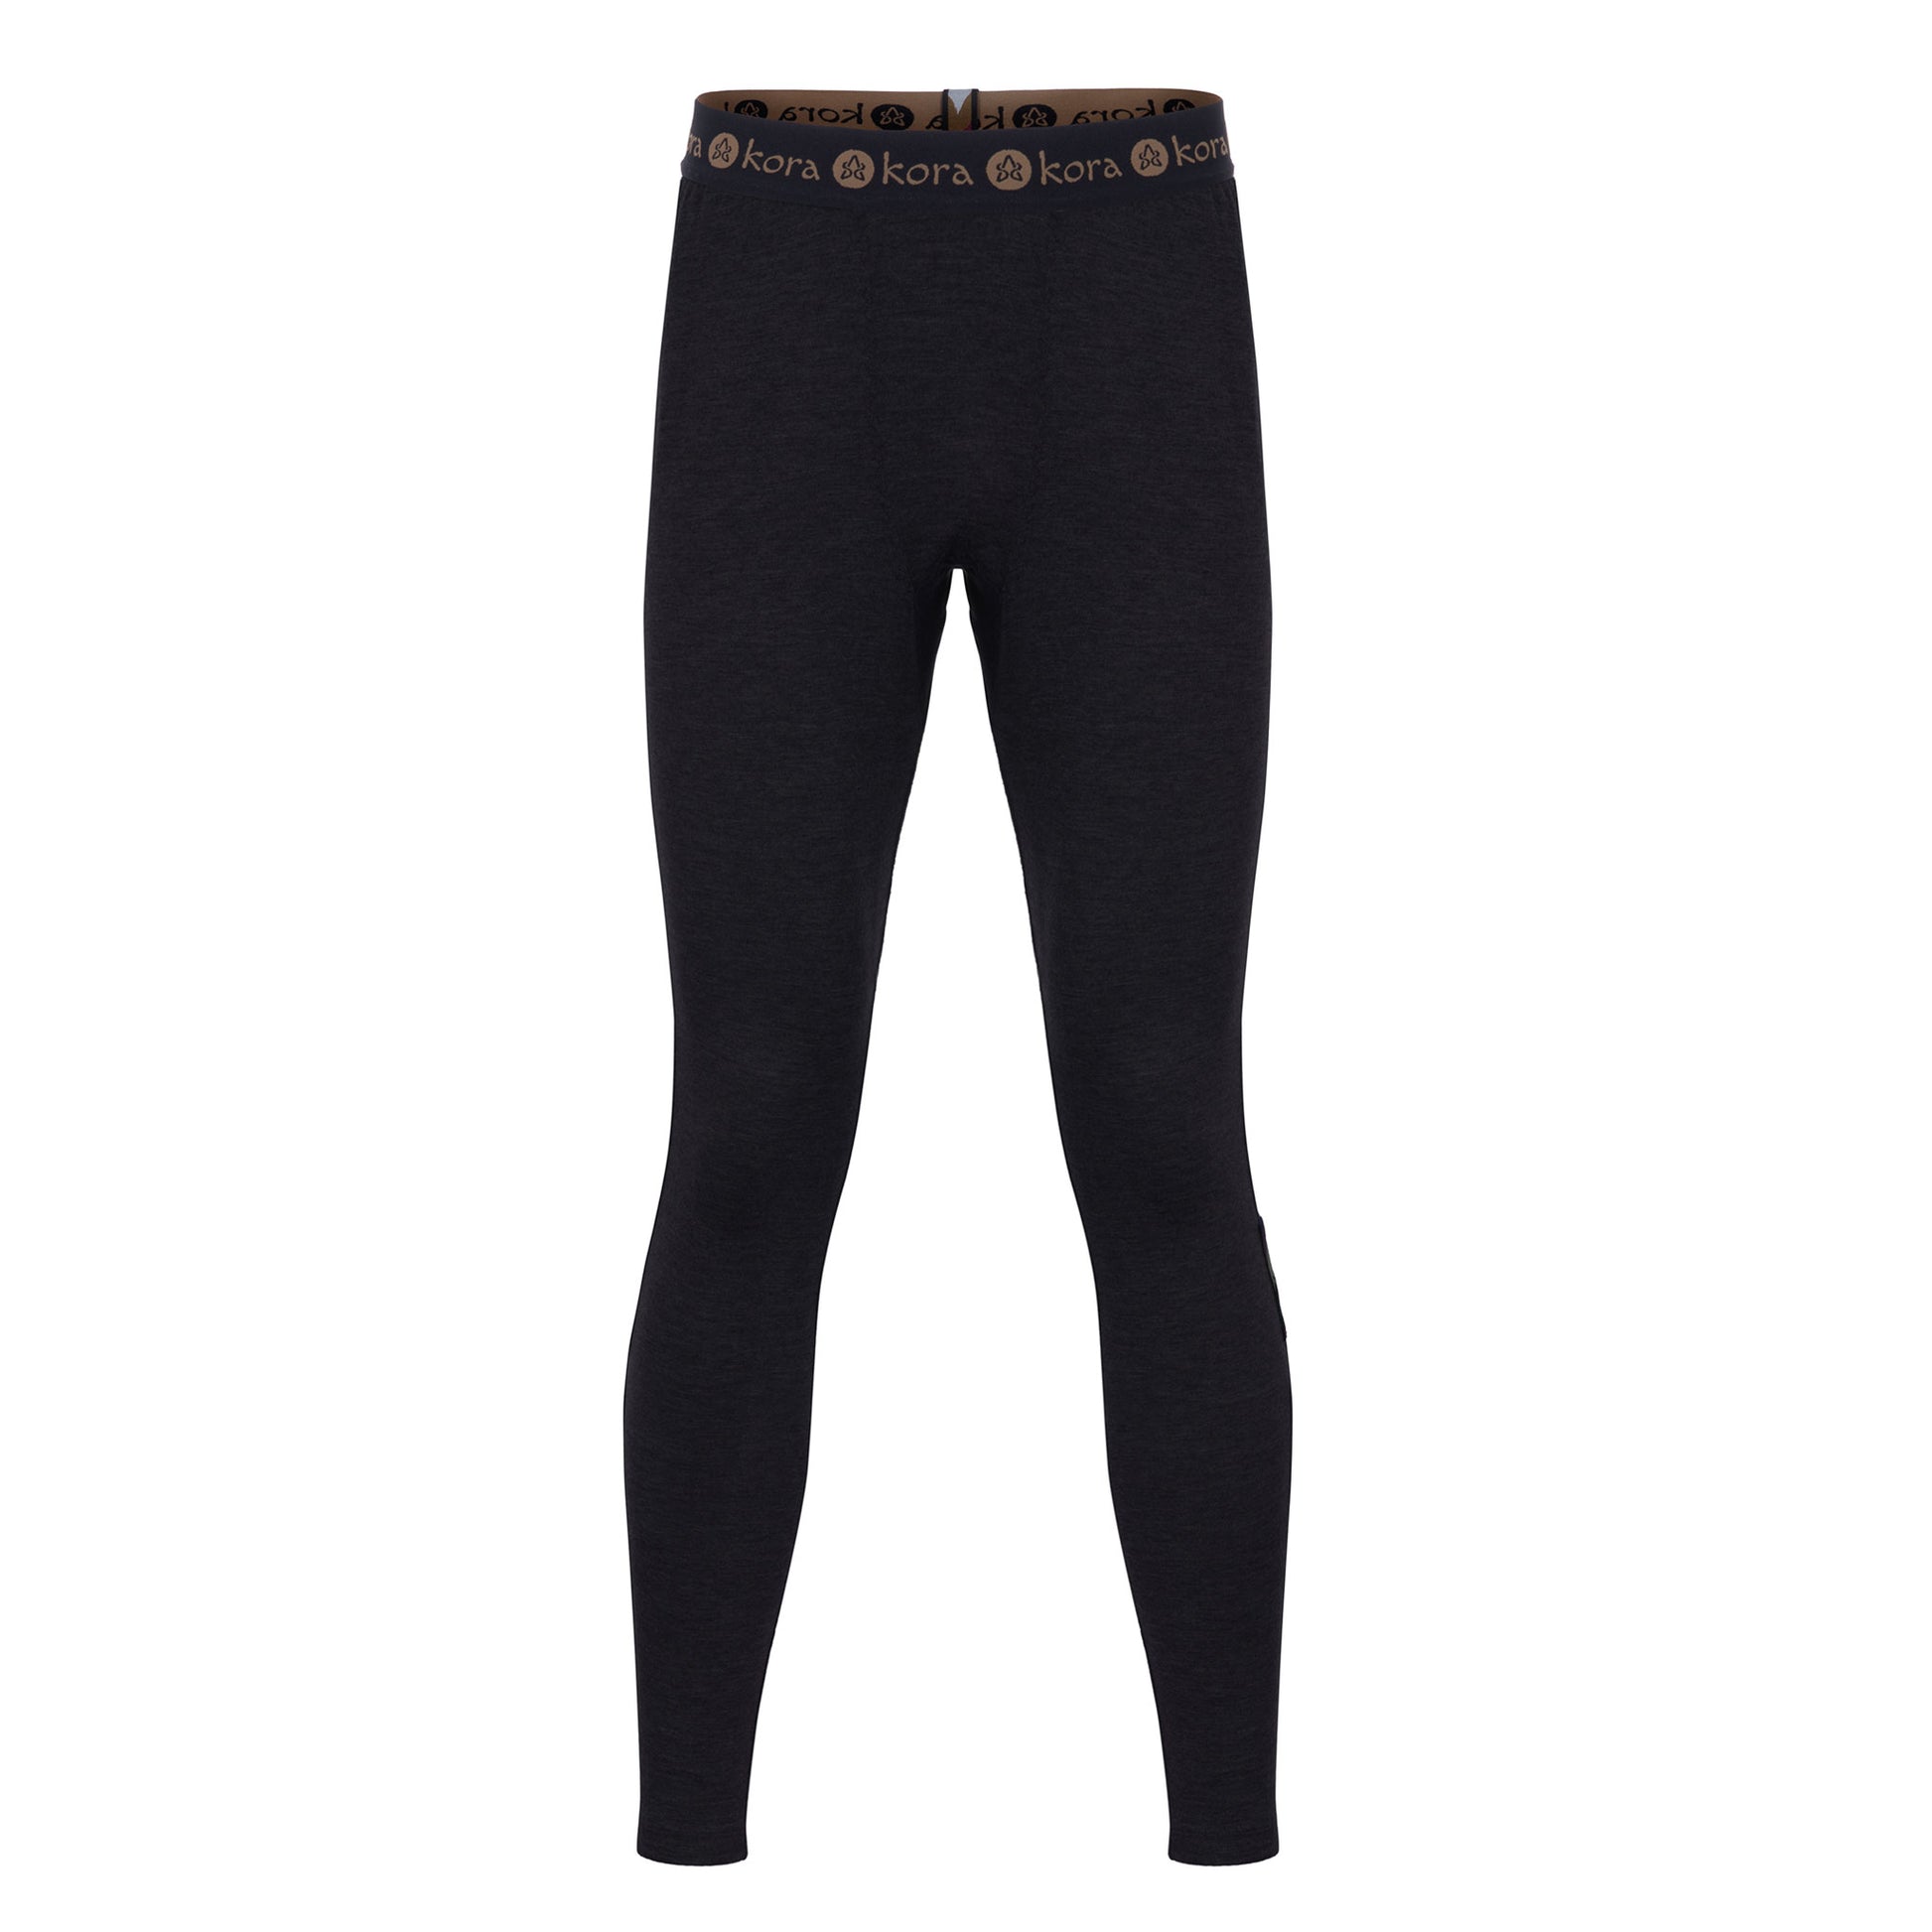 Warm & Cozy merino wool leggings - Perfect as a base layer all